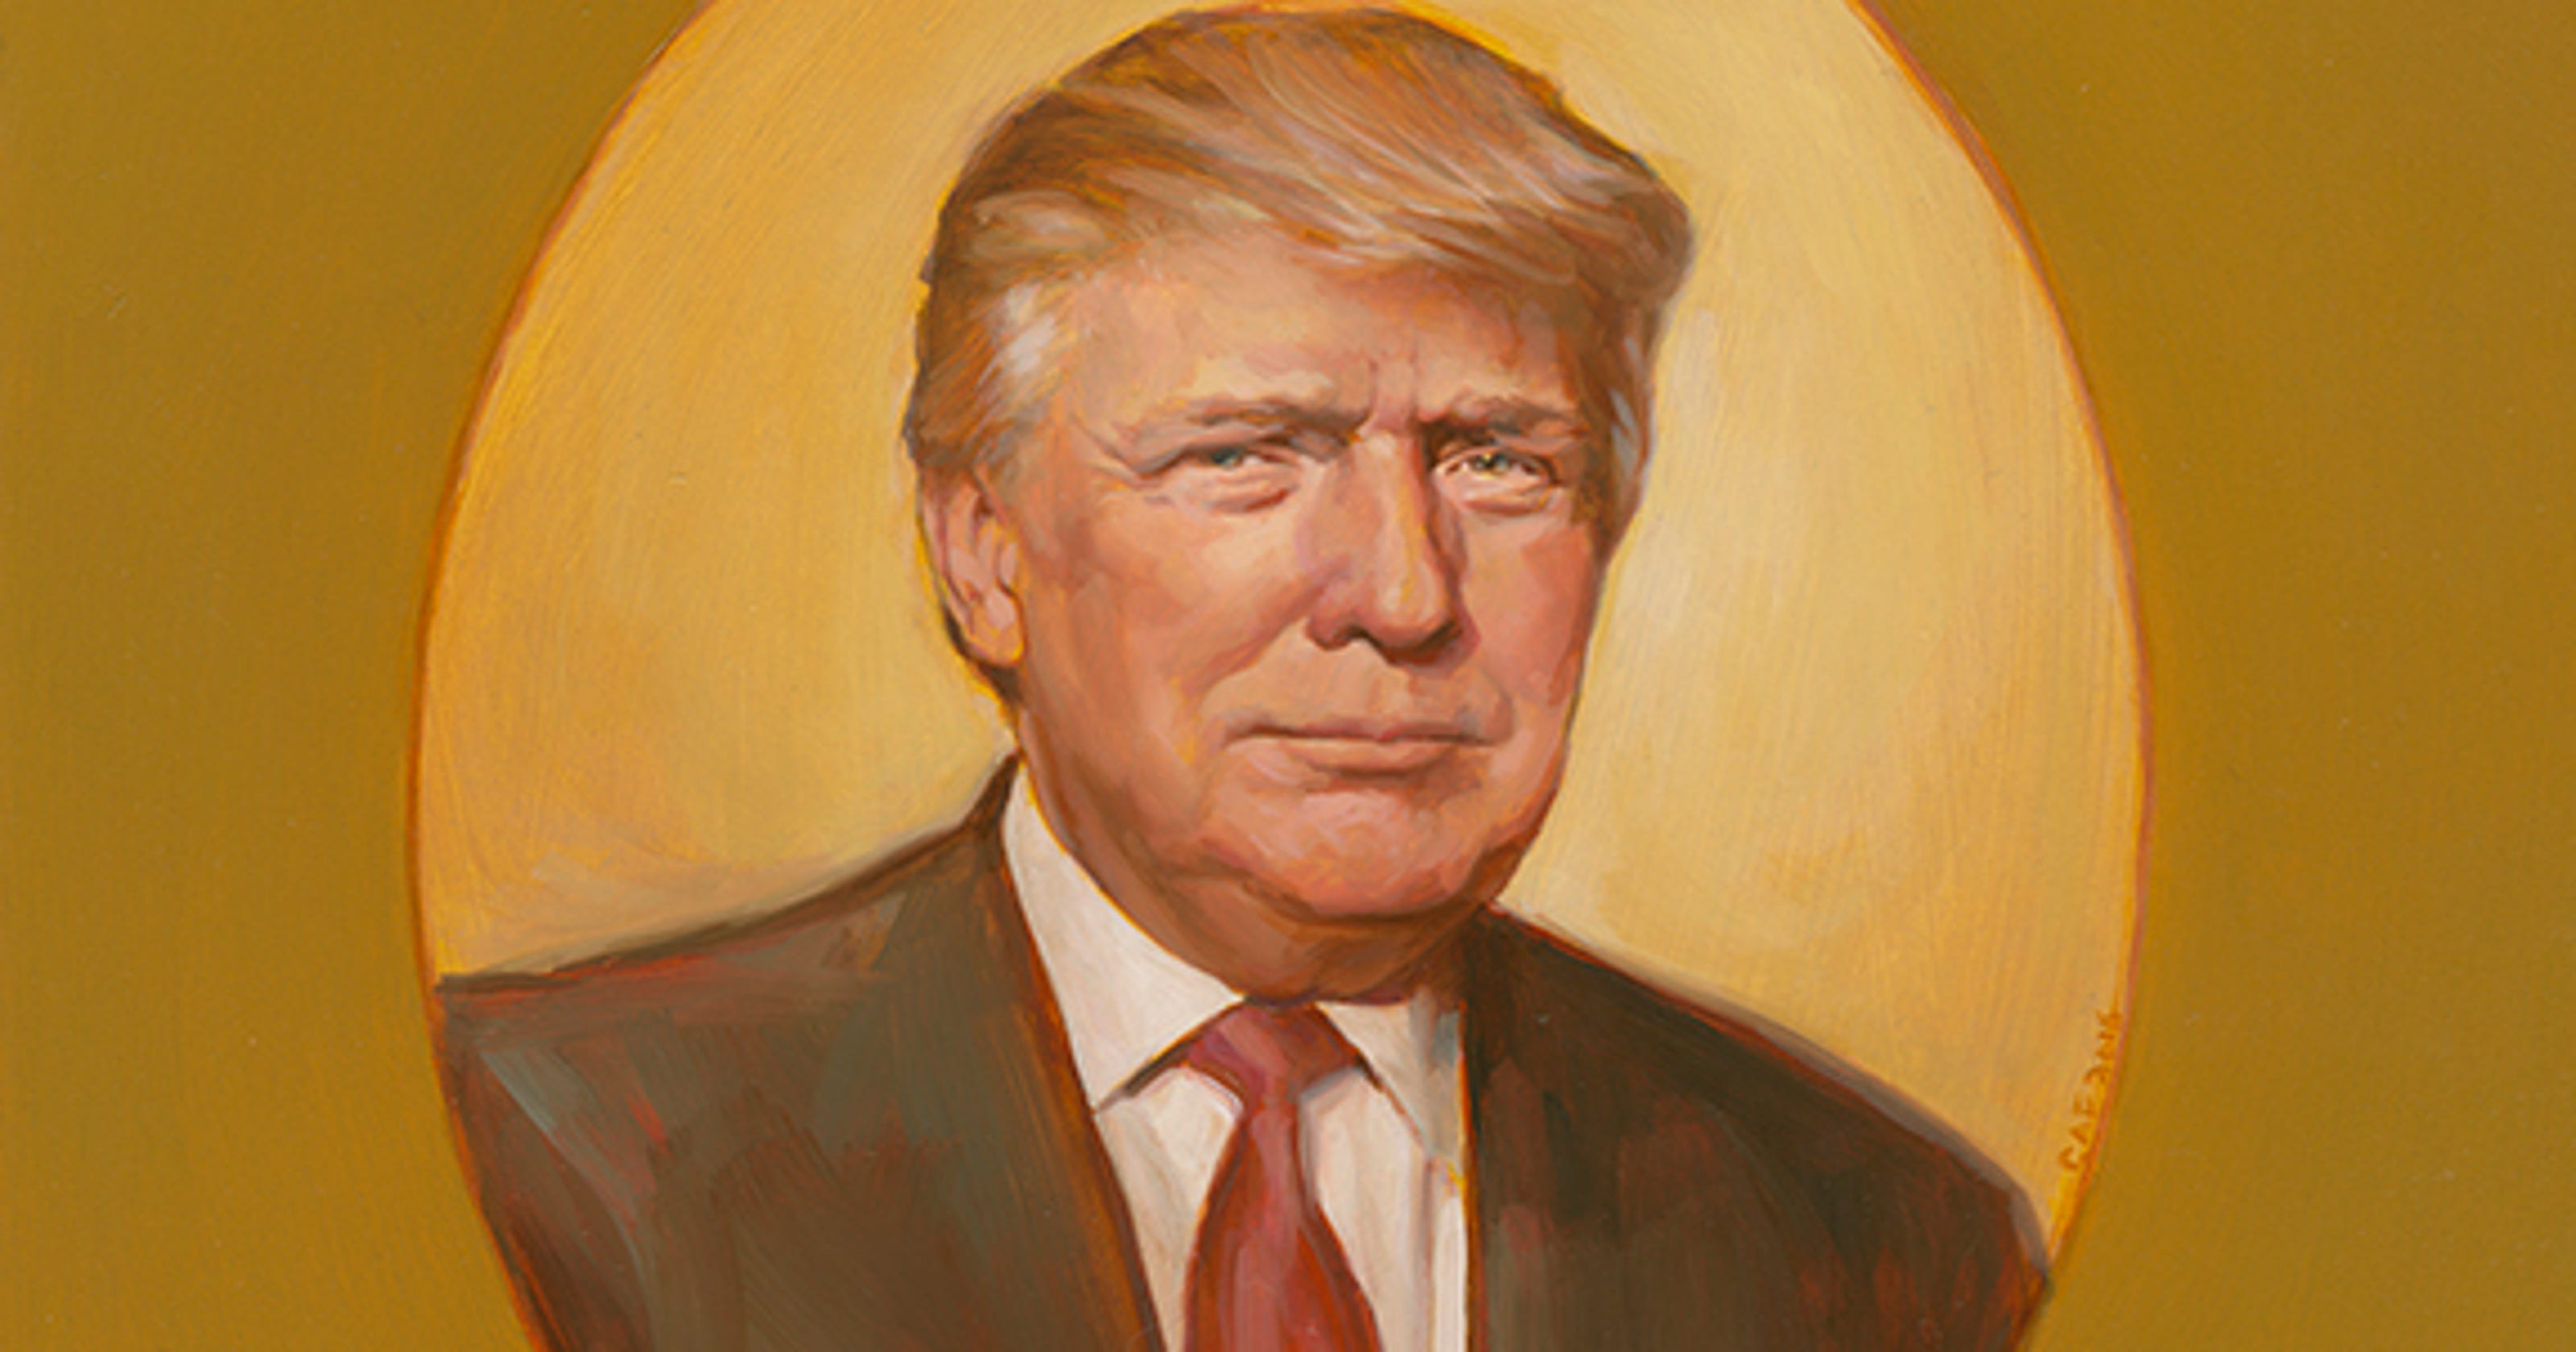 Trump Has His First Presidential Portrait